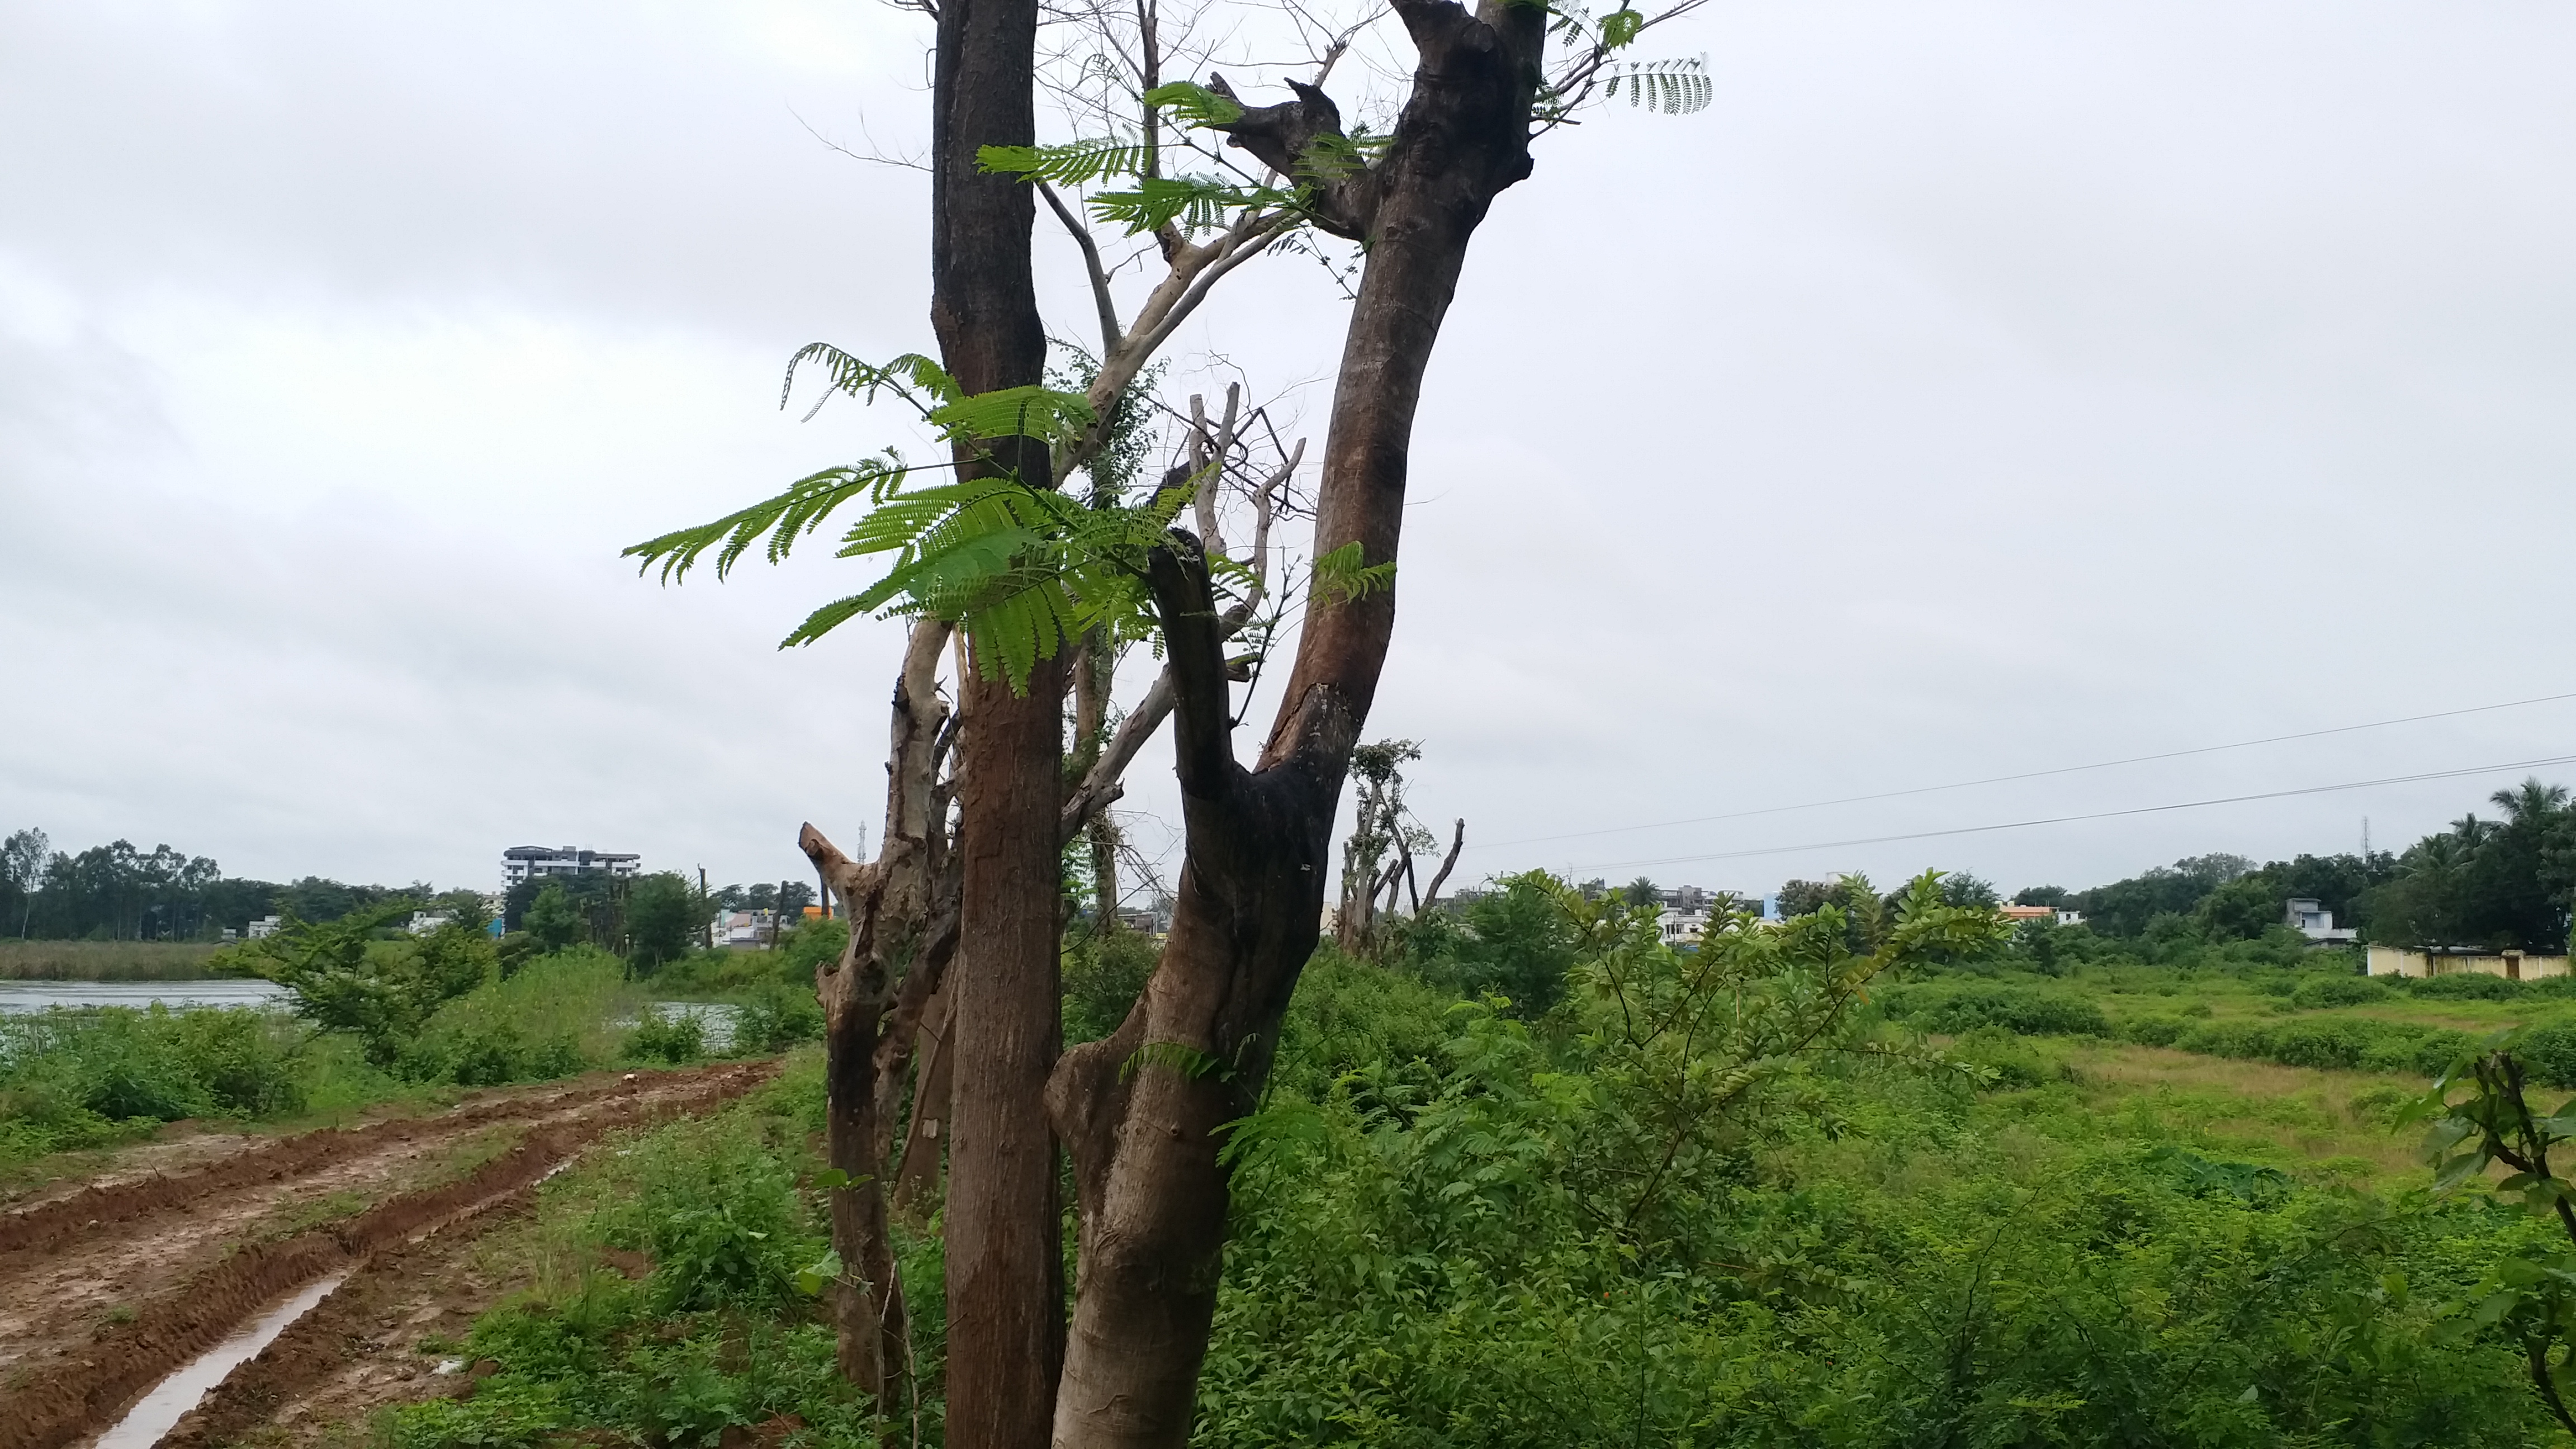 Greenery started appearing in shifted trees